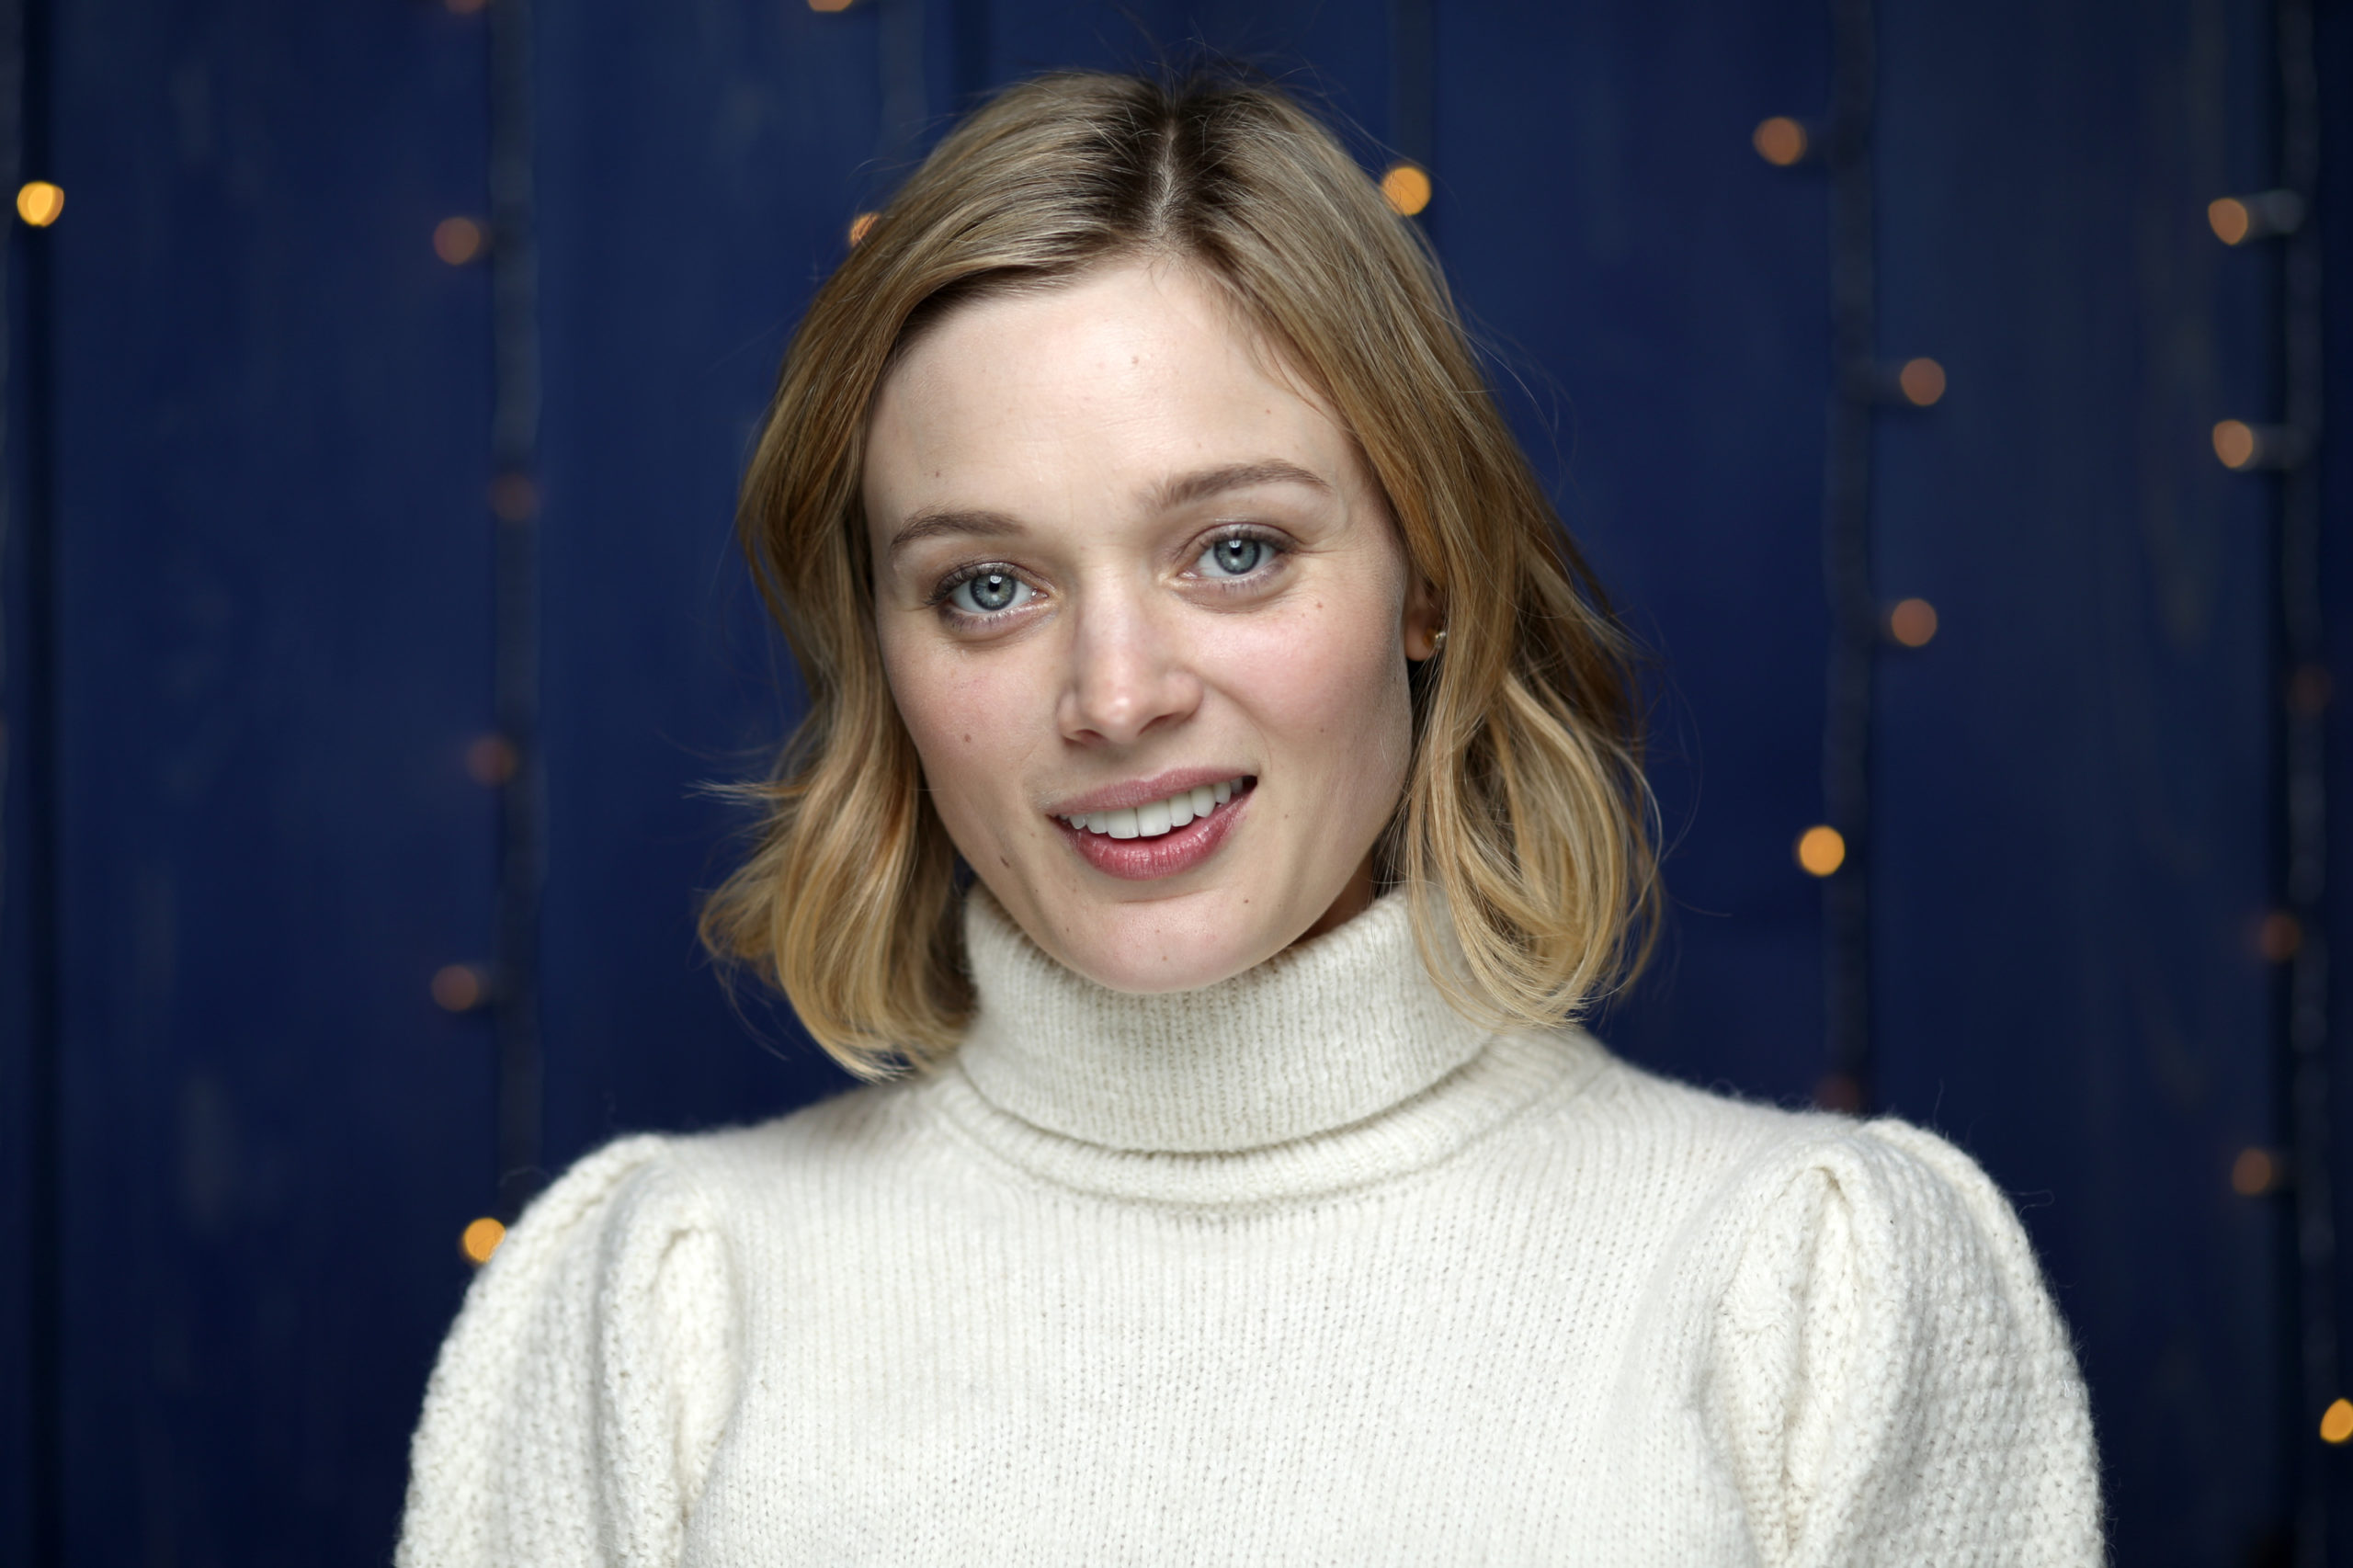 Bella Heathcote will play the role of Andy Oliver